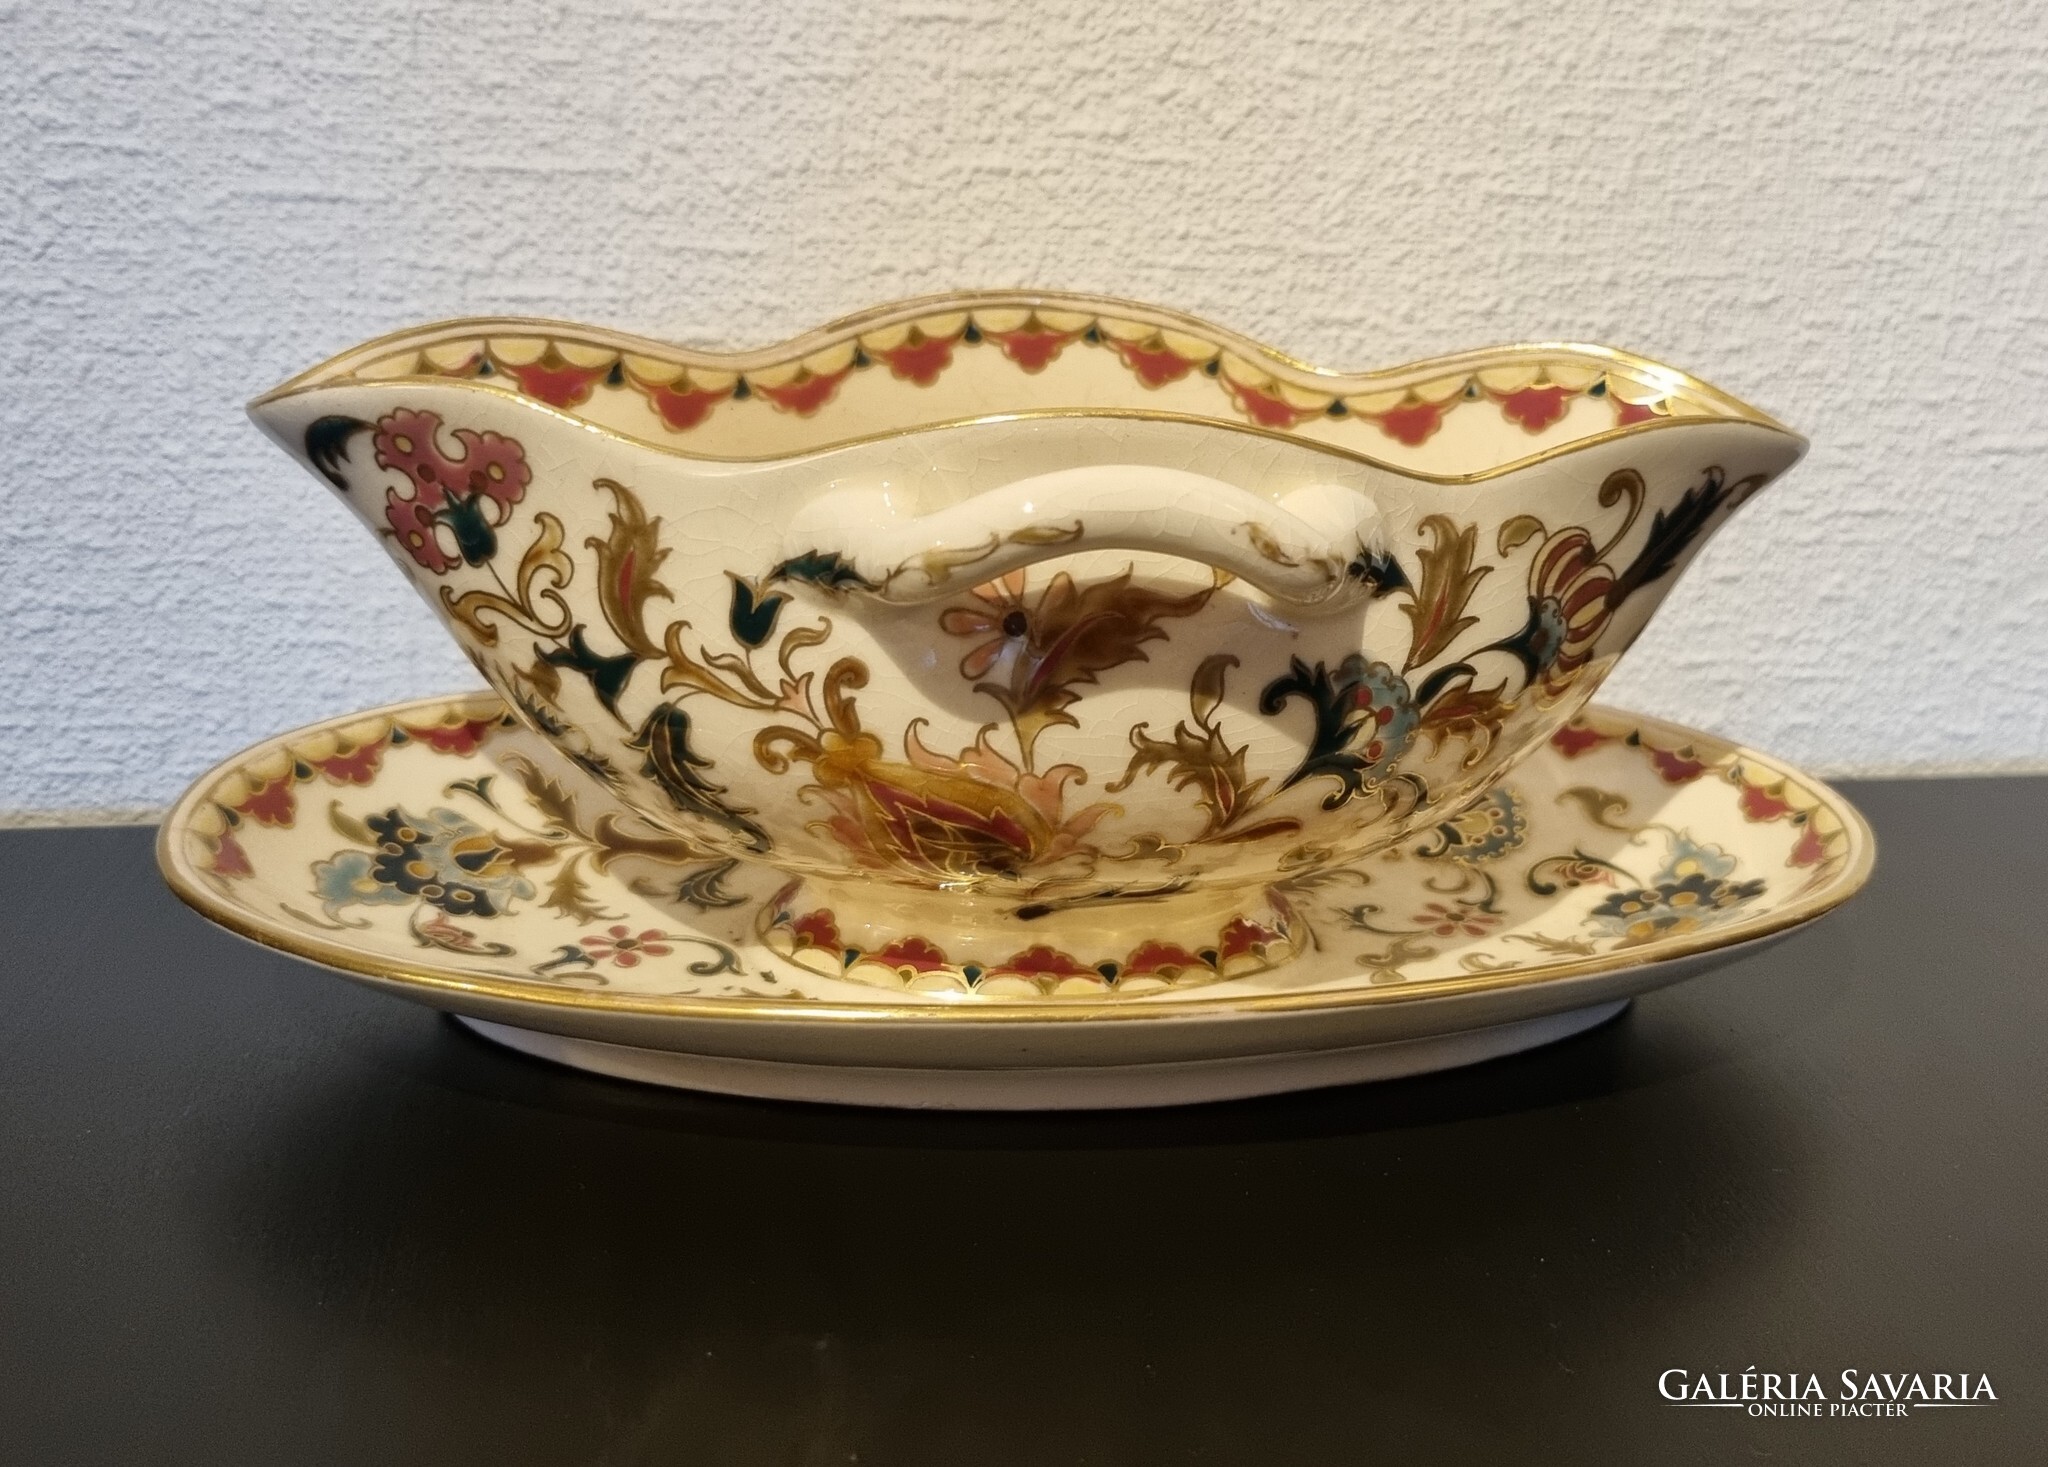 perzsa for sale  Galeria Savaria online marketplace - Buy or sell